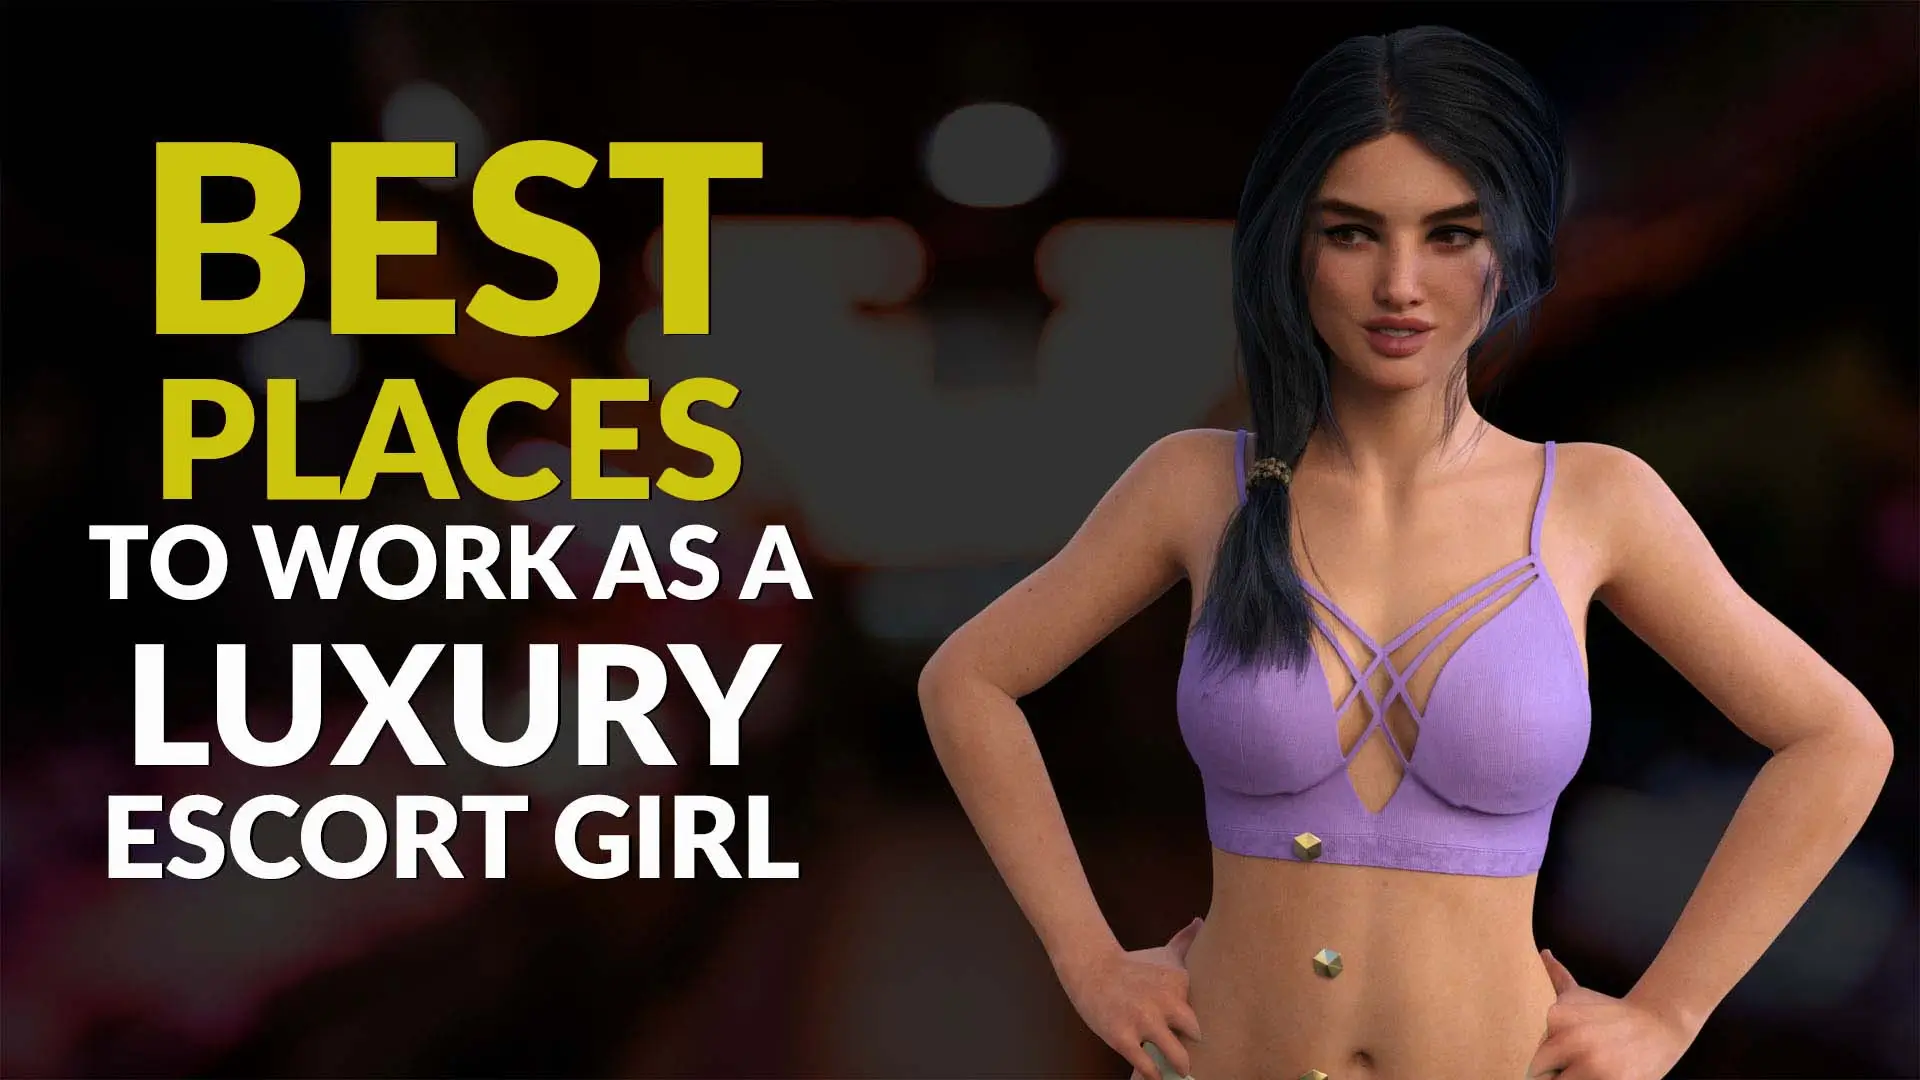 Best places to work as a Luxury Escort Girl (1)